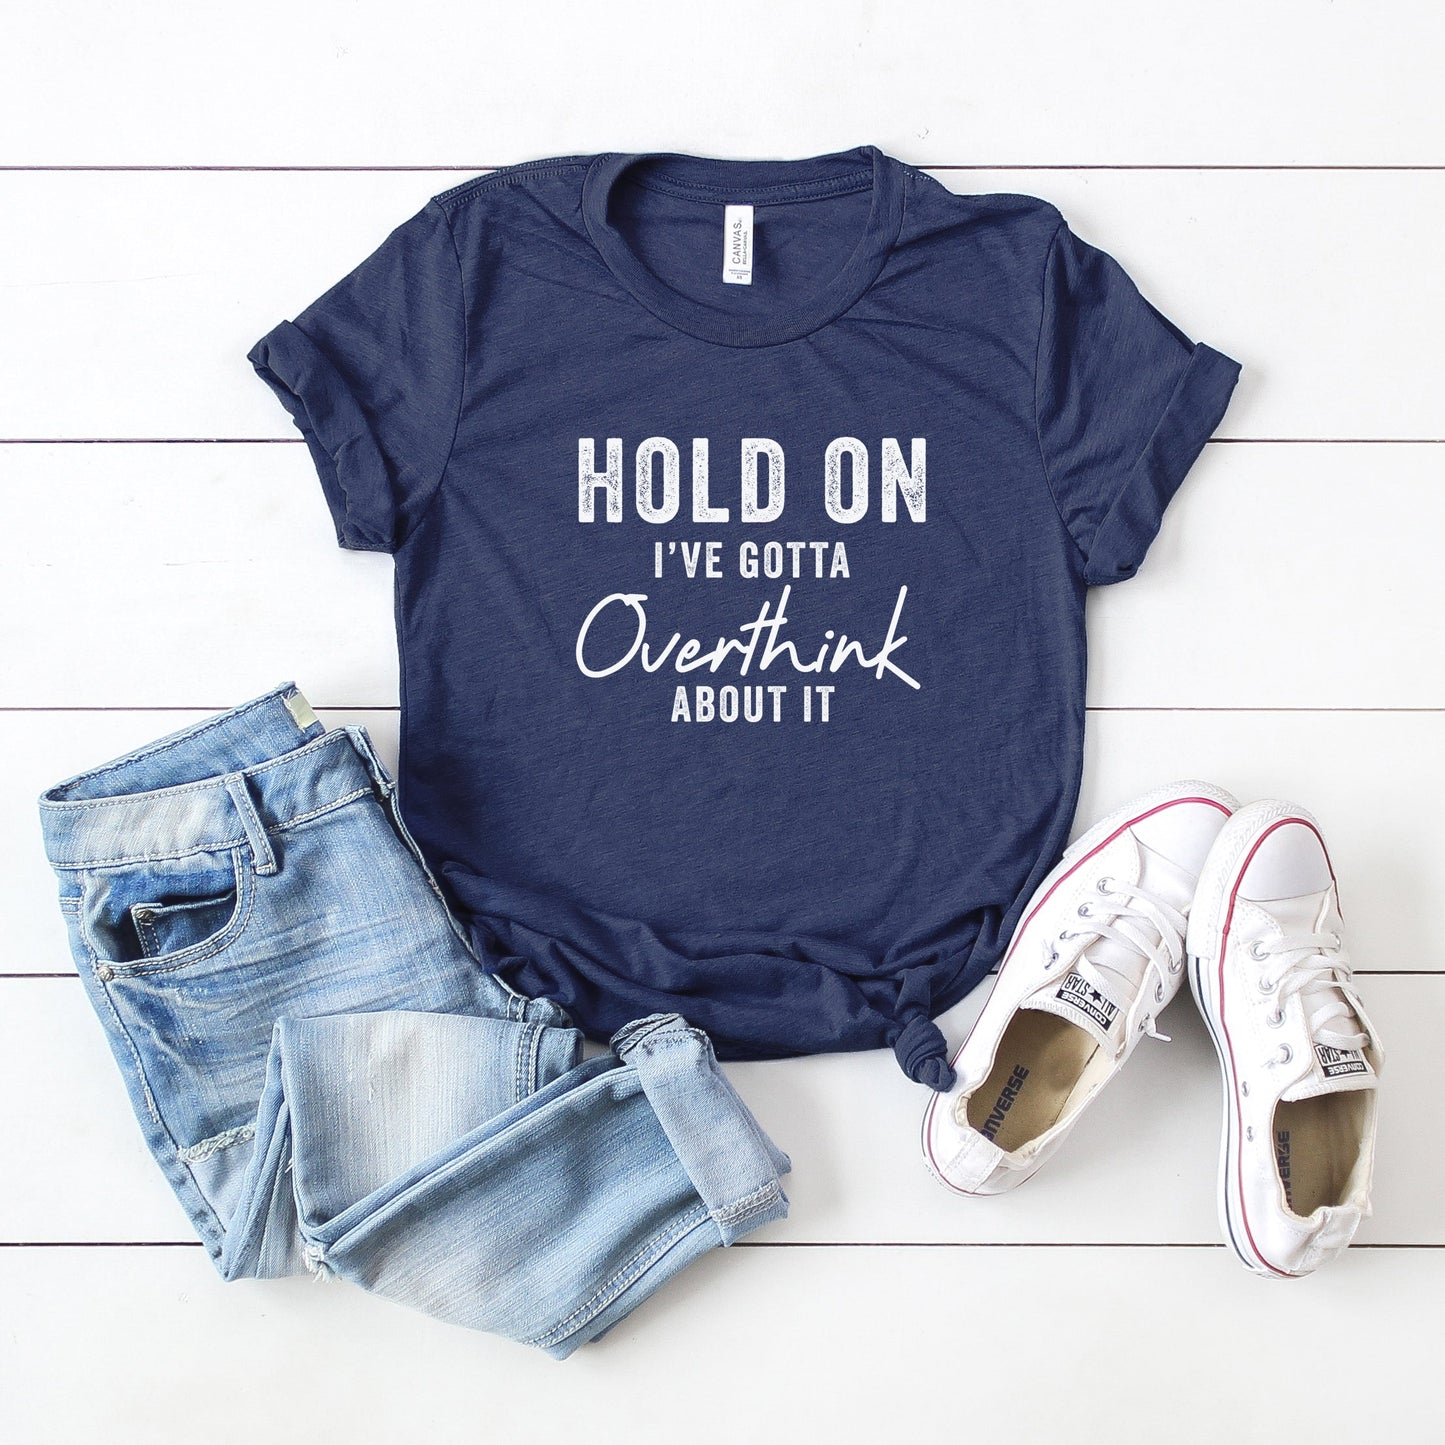 Hold on, I've Got to Overthink about it | Short Sleeve Crew Neck